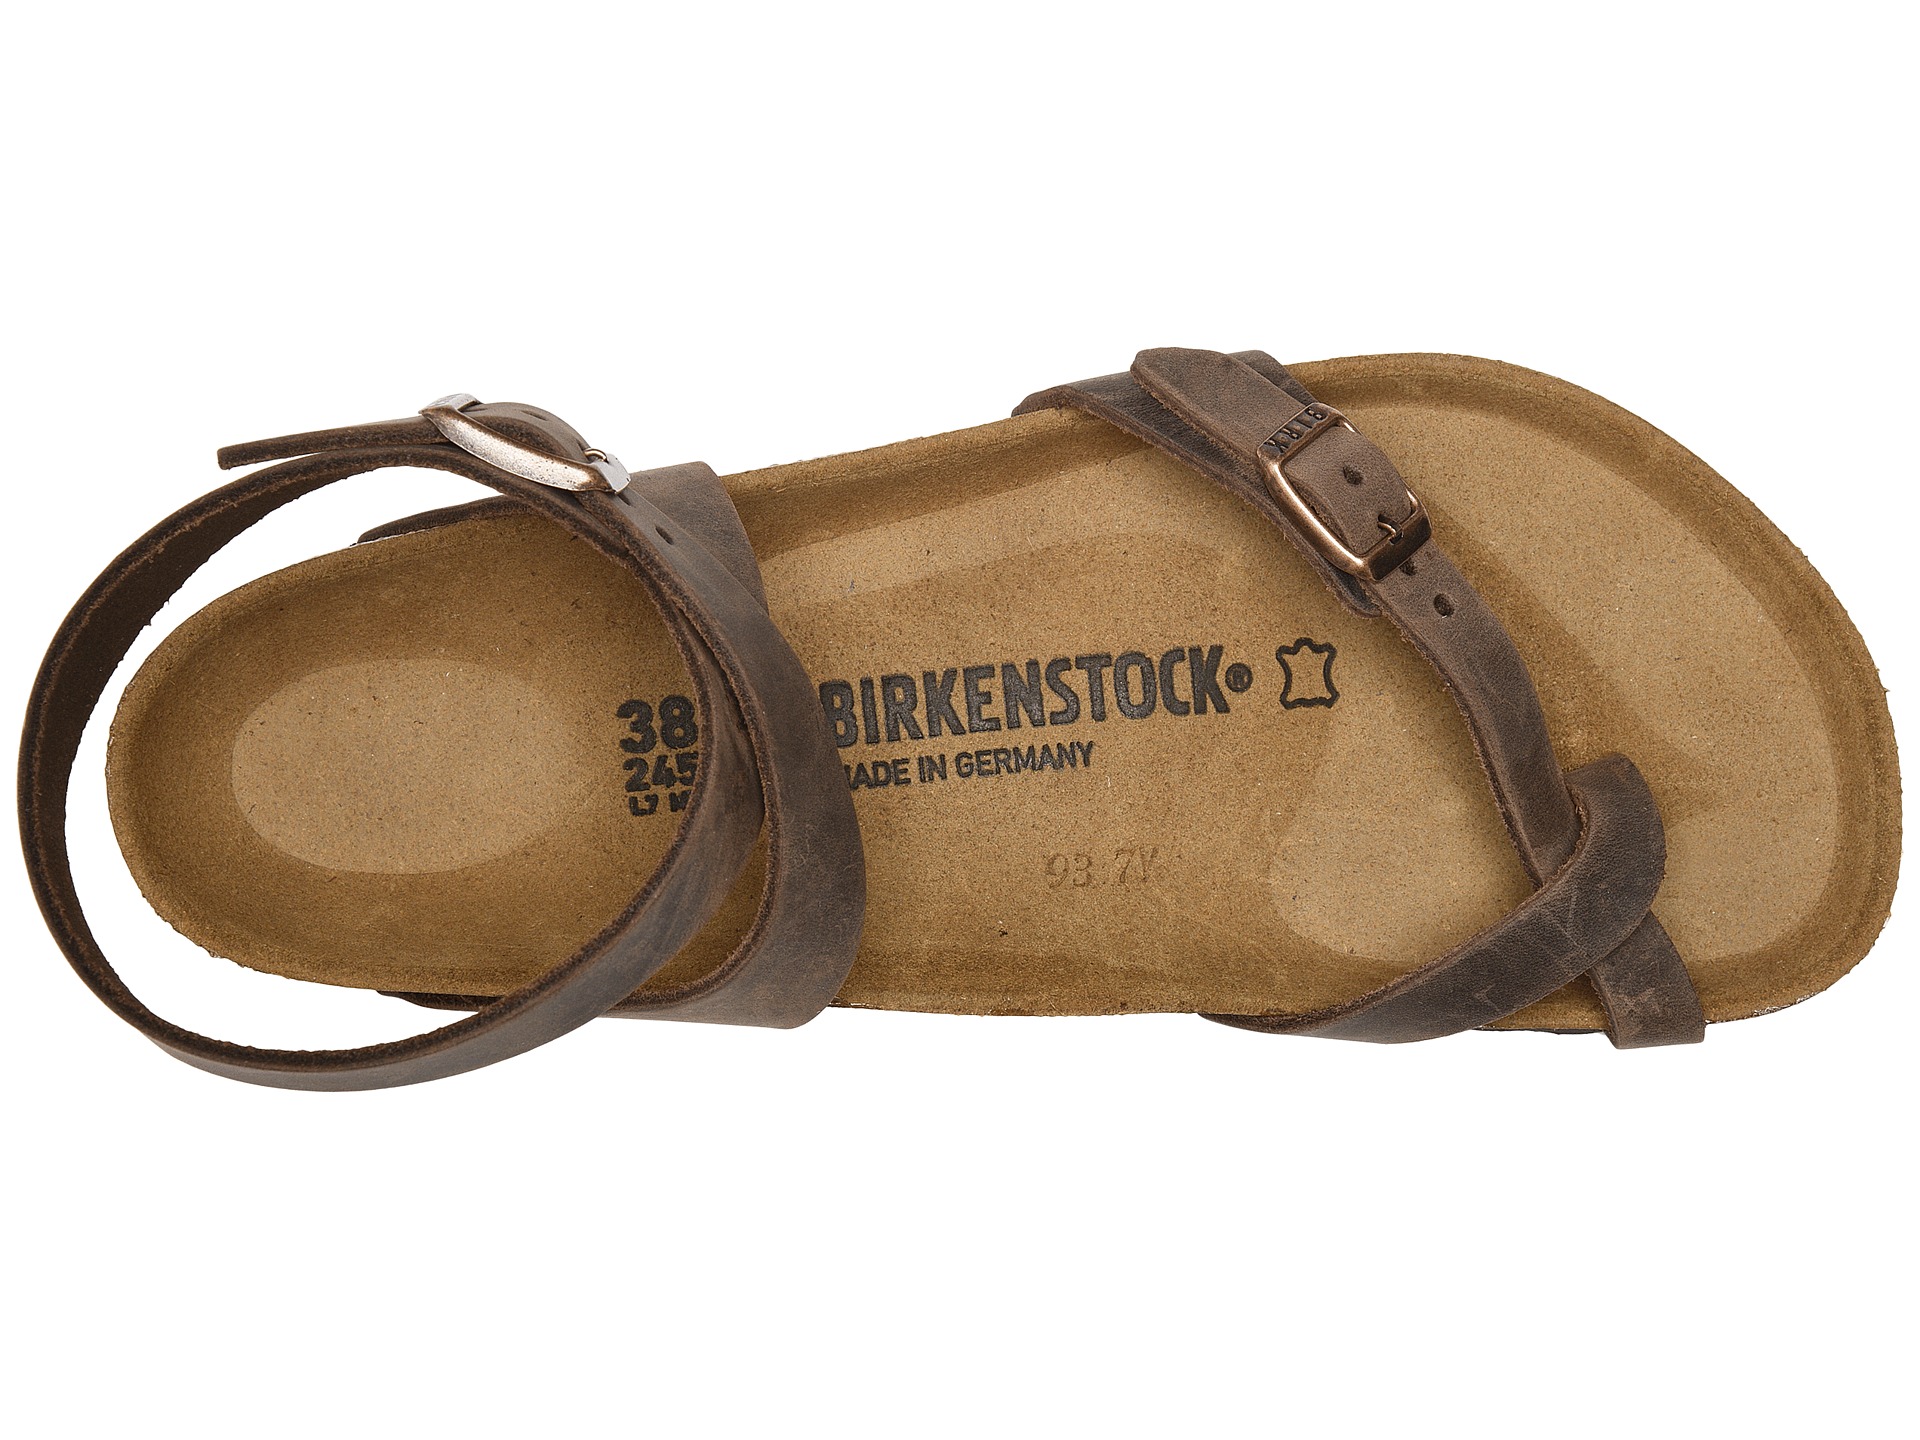 Birkenstock Yara Oiled Leather, Shoes | Shipped Free at Zappos